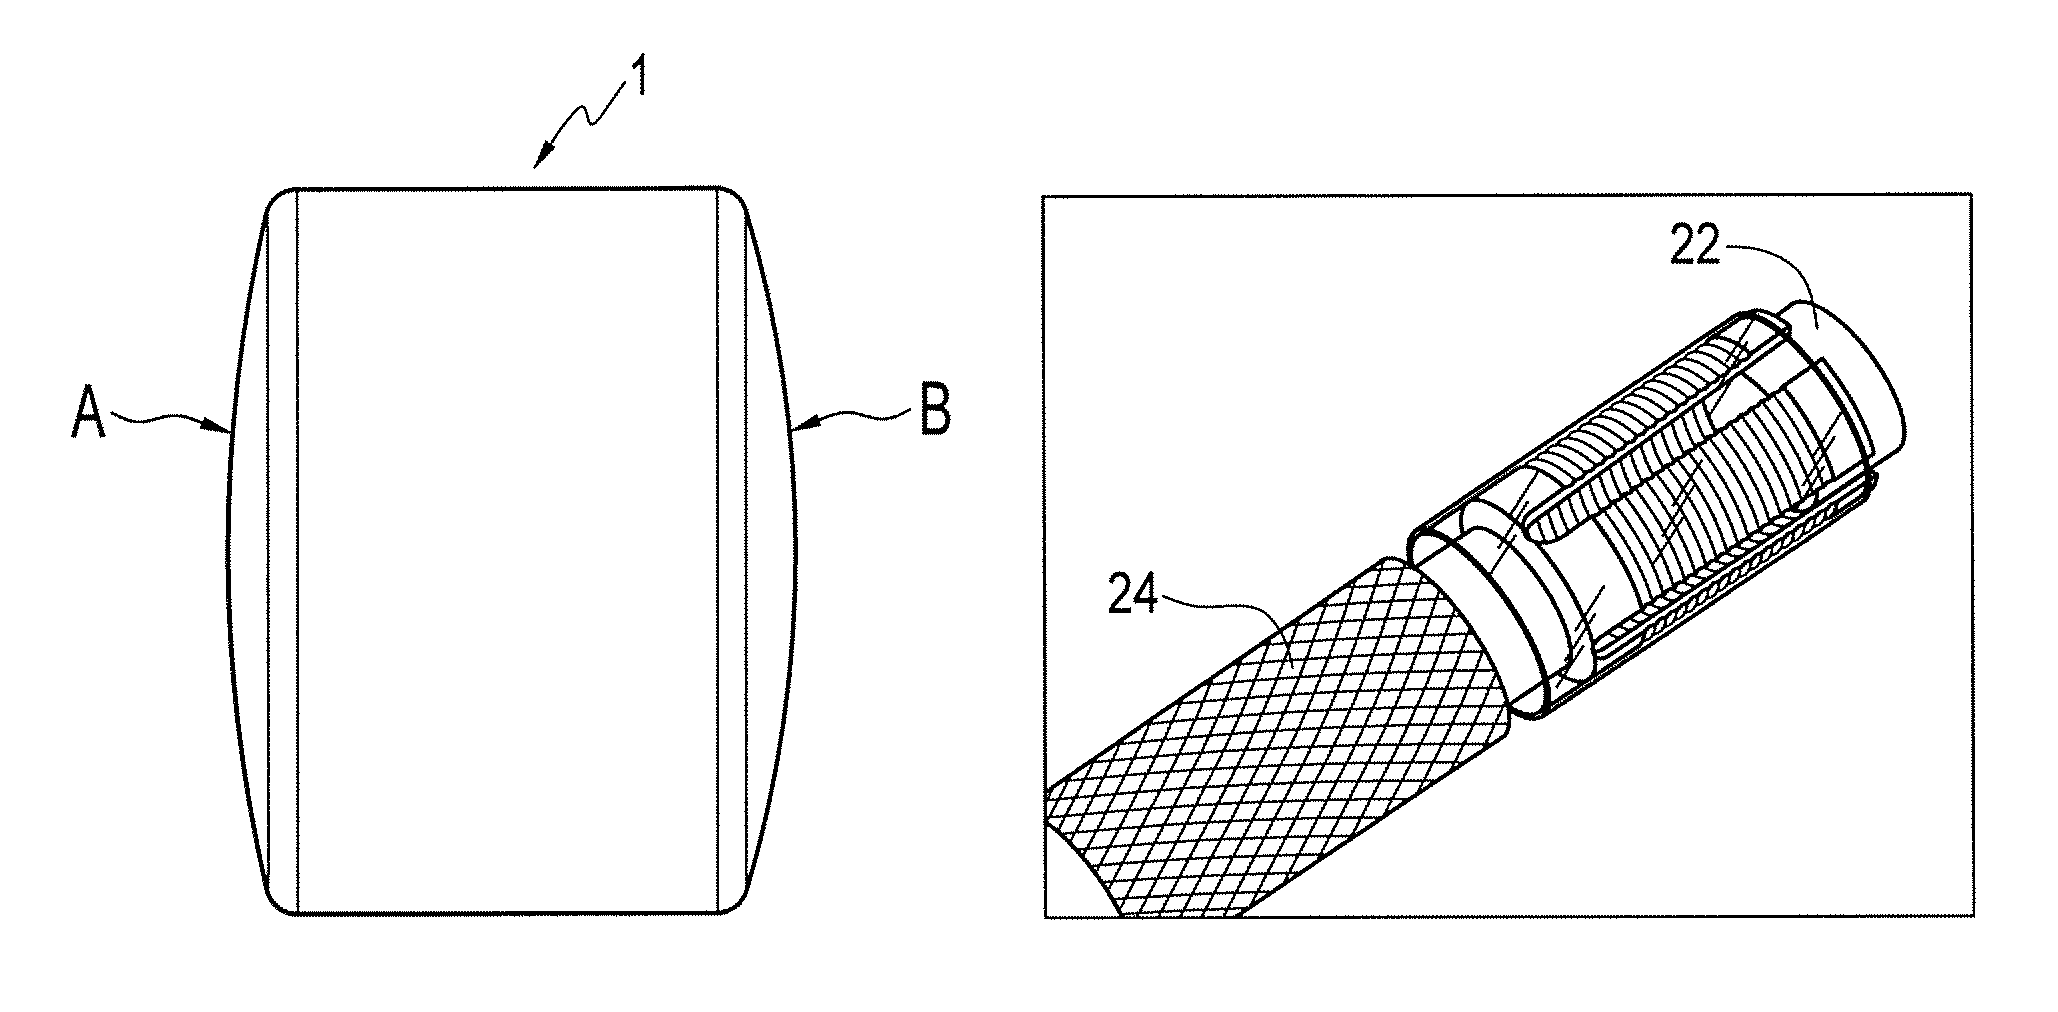 Method and instrumentation for osteochondral repair using preformed implants